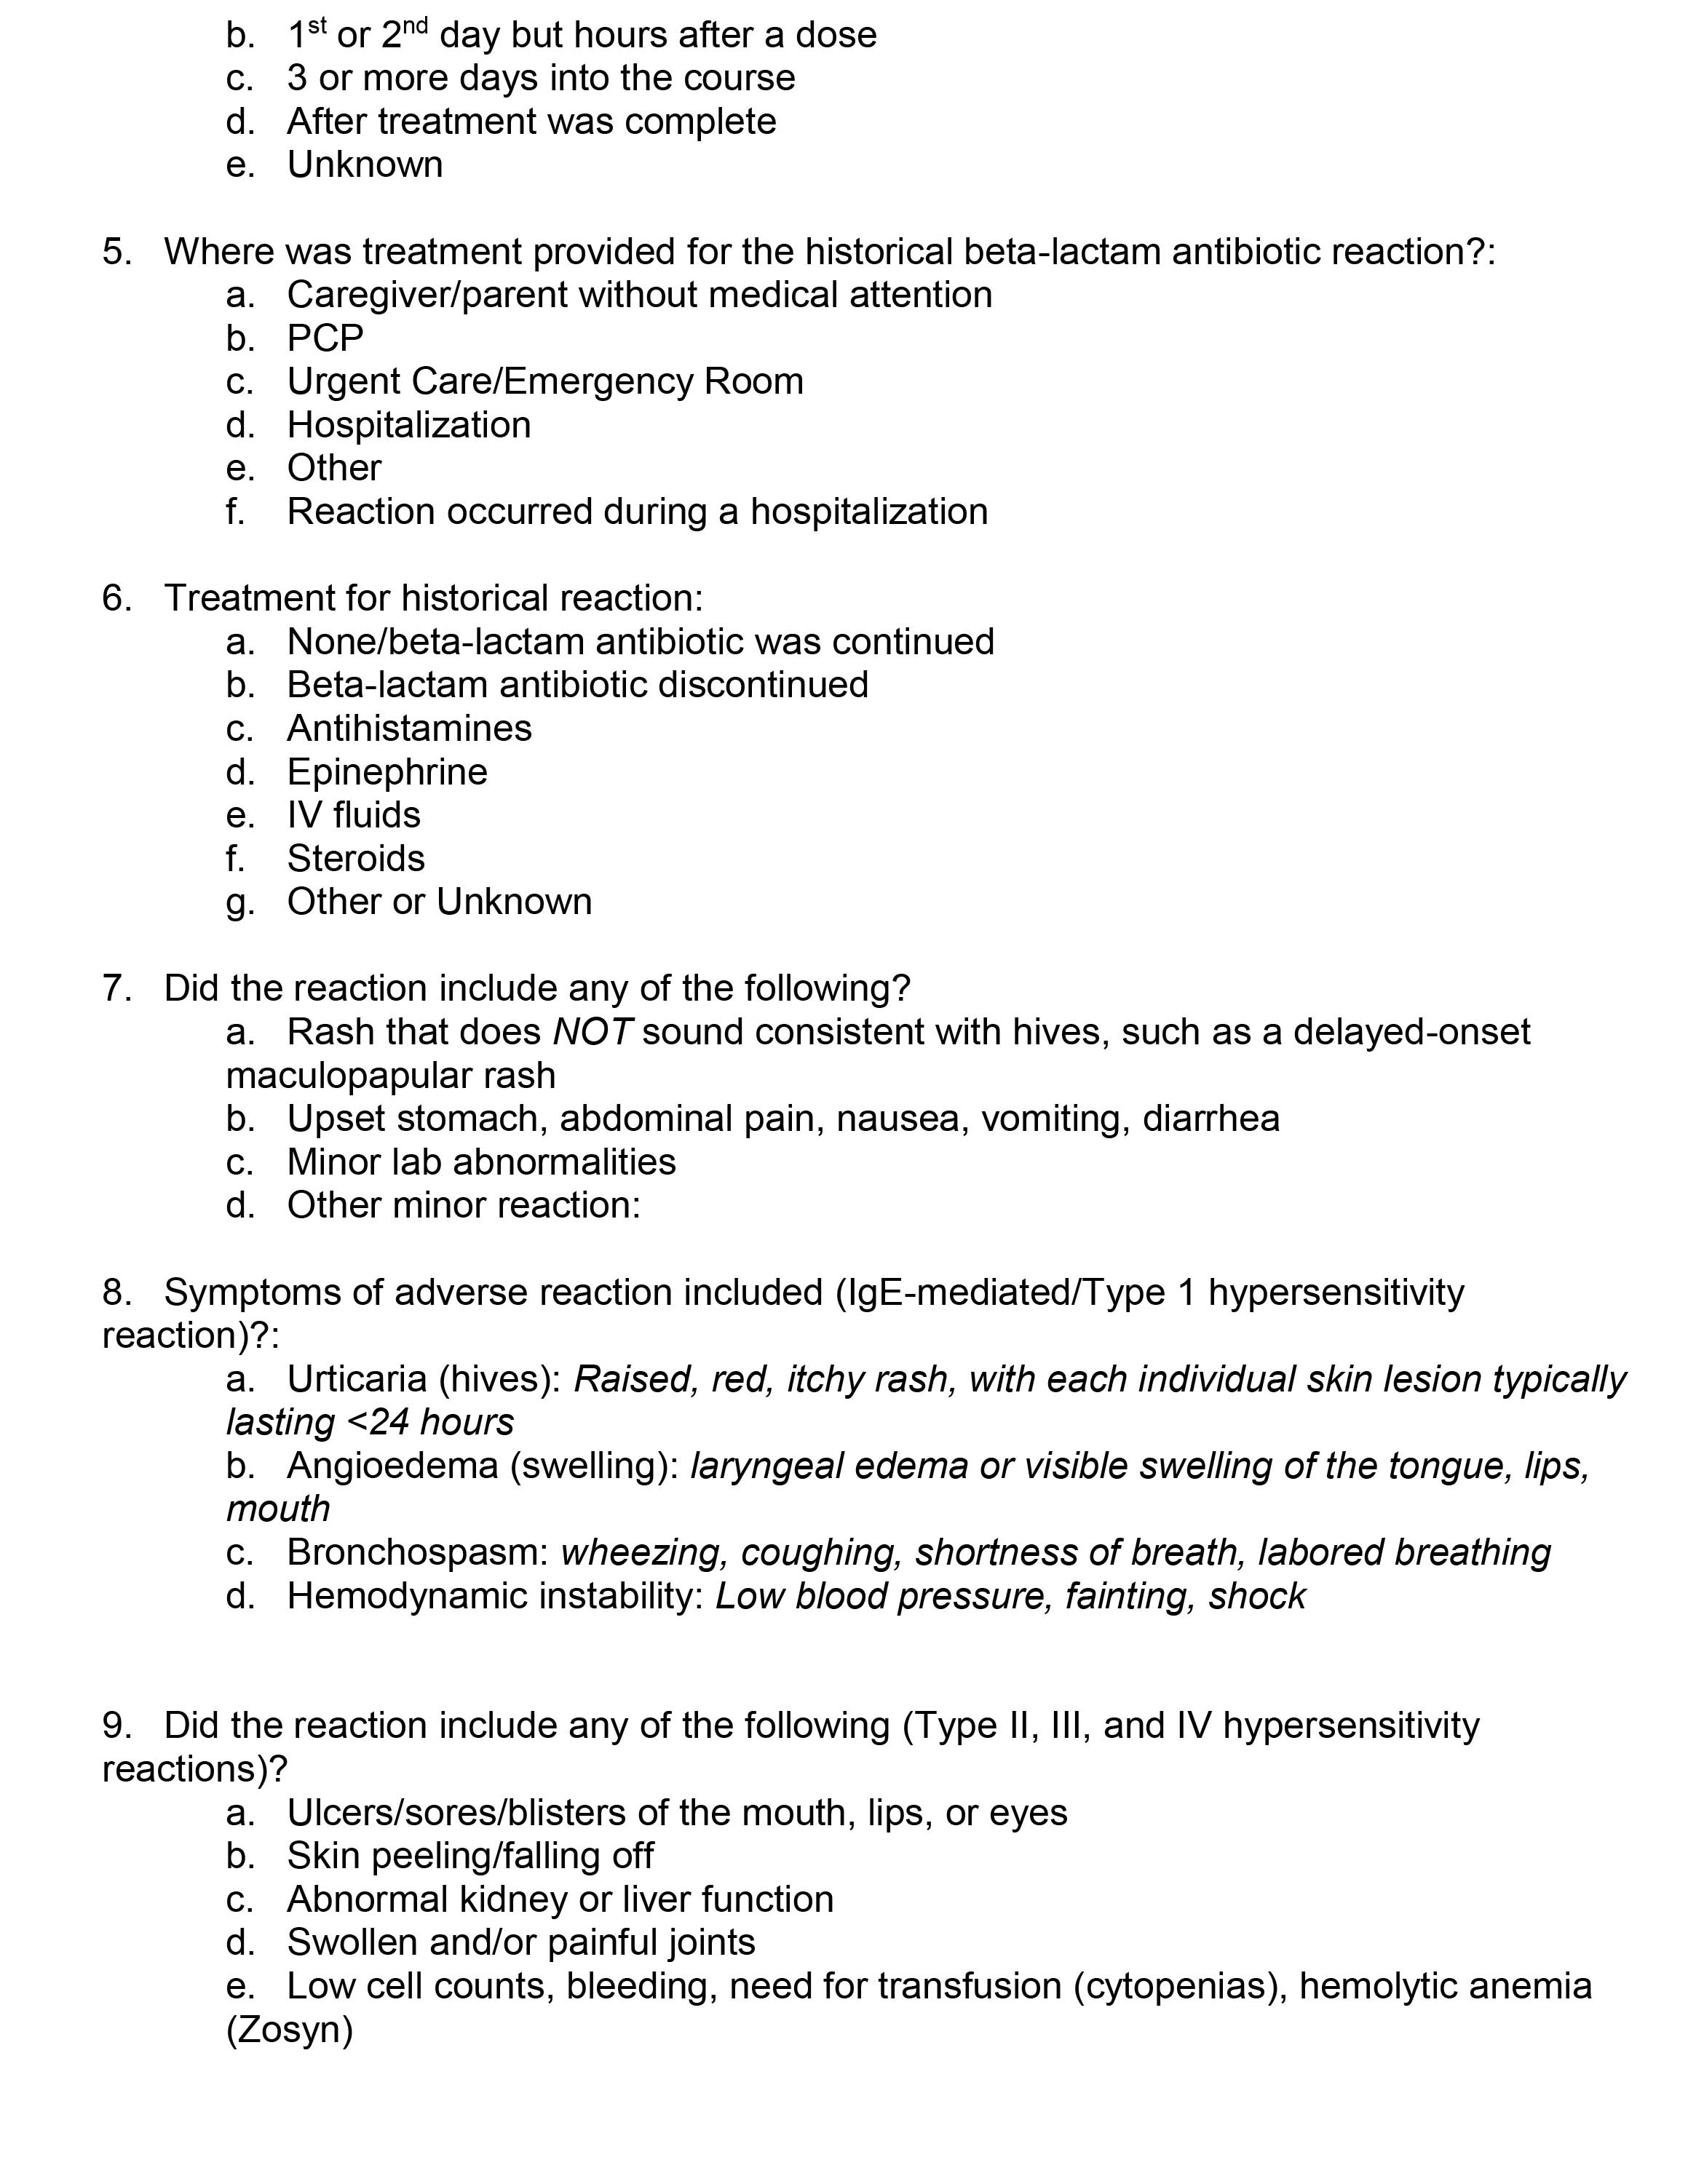 Clinical Pathways Document Image5